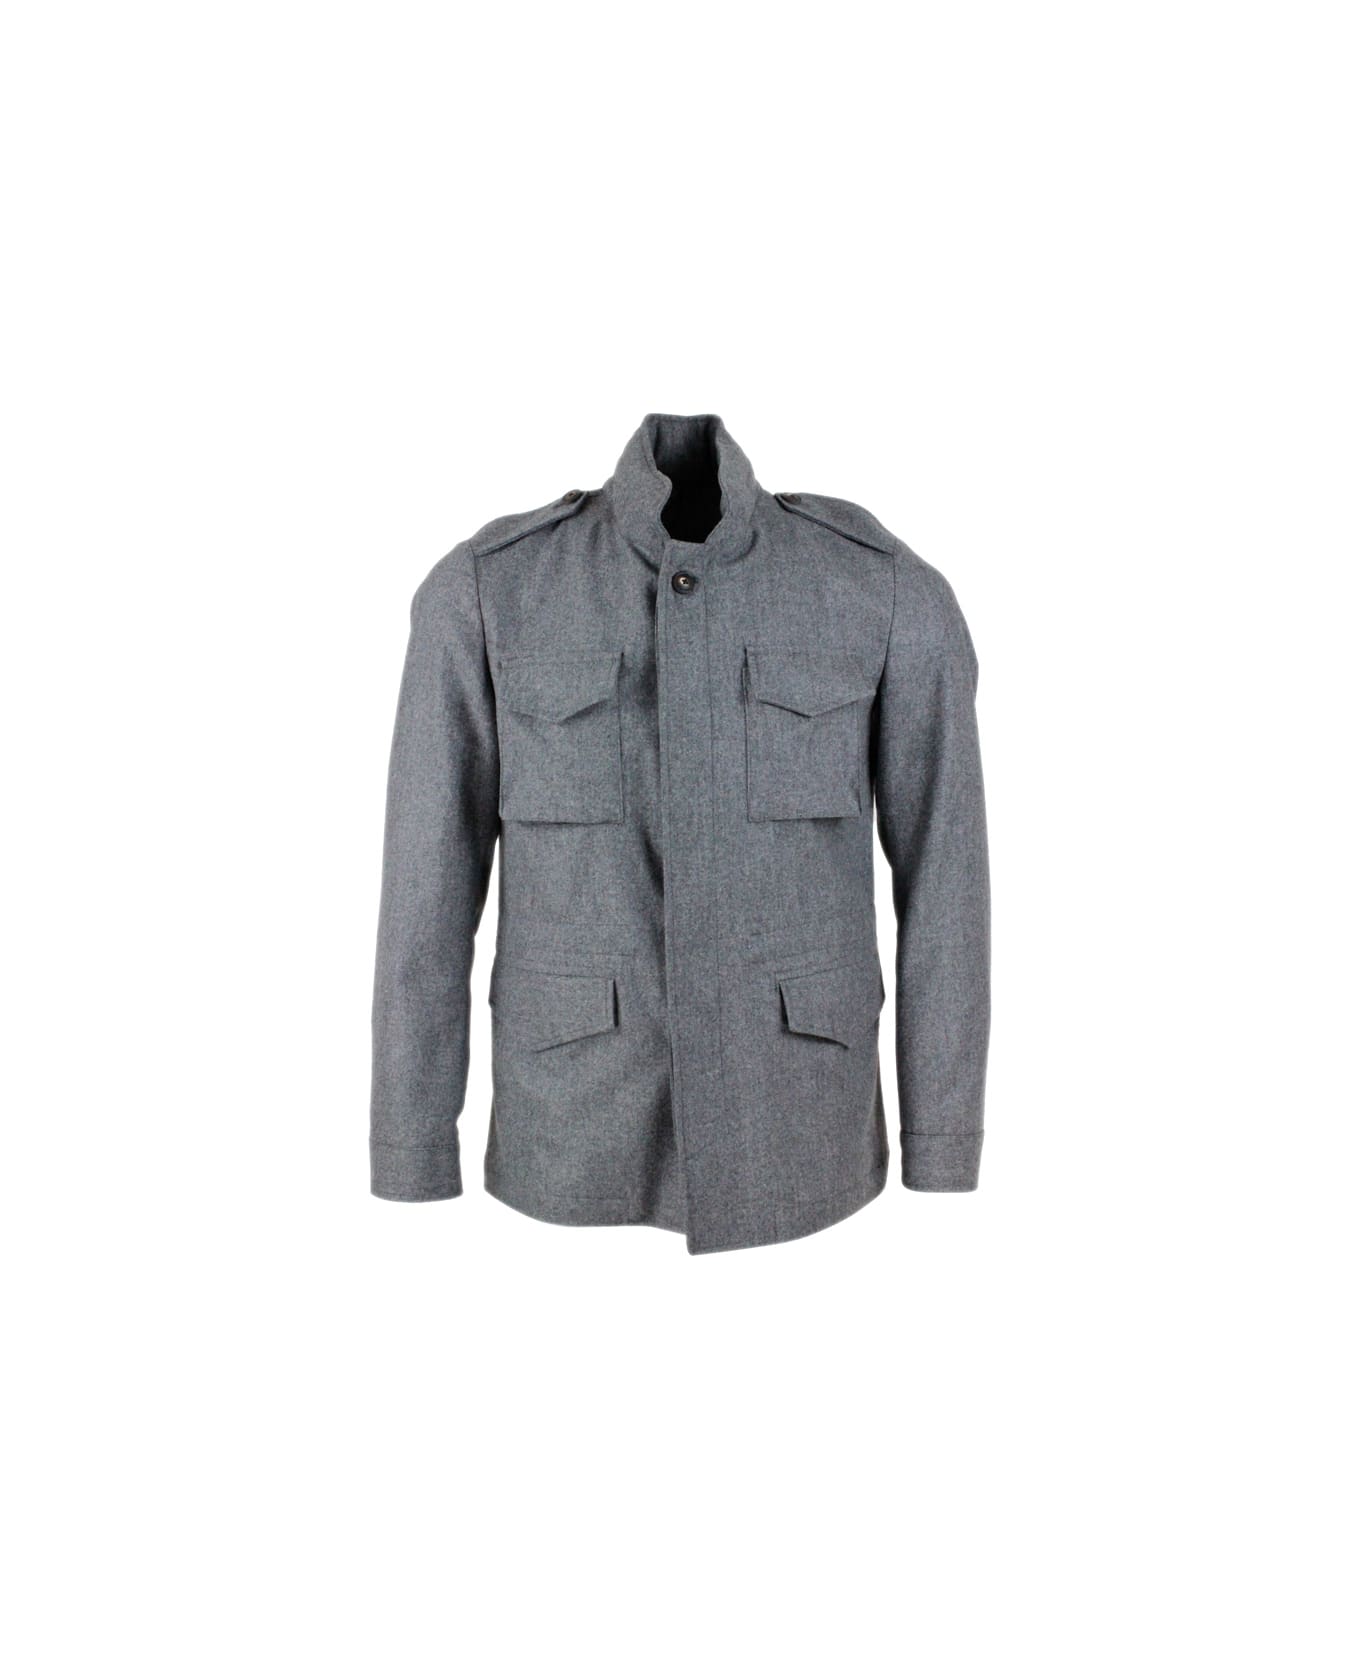 Barba Napoli Men's Field Jacket In Pure Virgin Wool, Unlined With Internal Drawstring With Button Closure, Pockets And Concealed Hood - Grey ジャケット